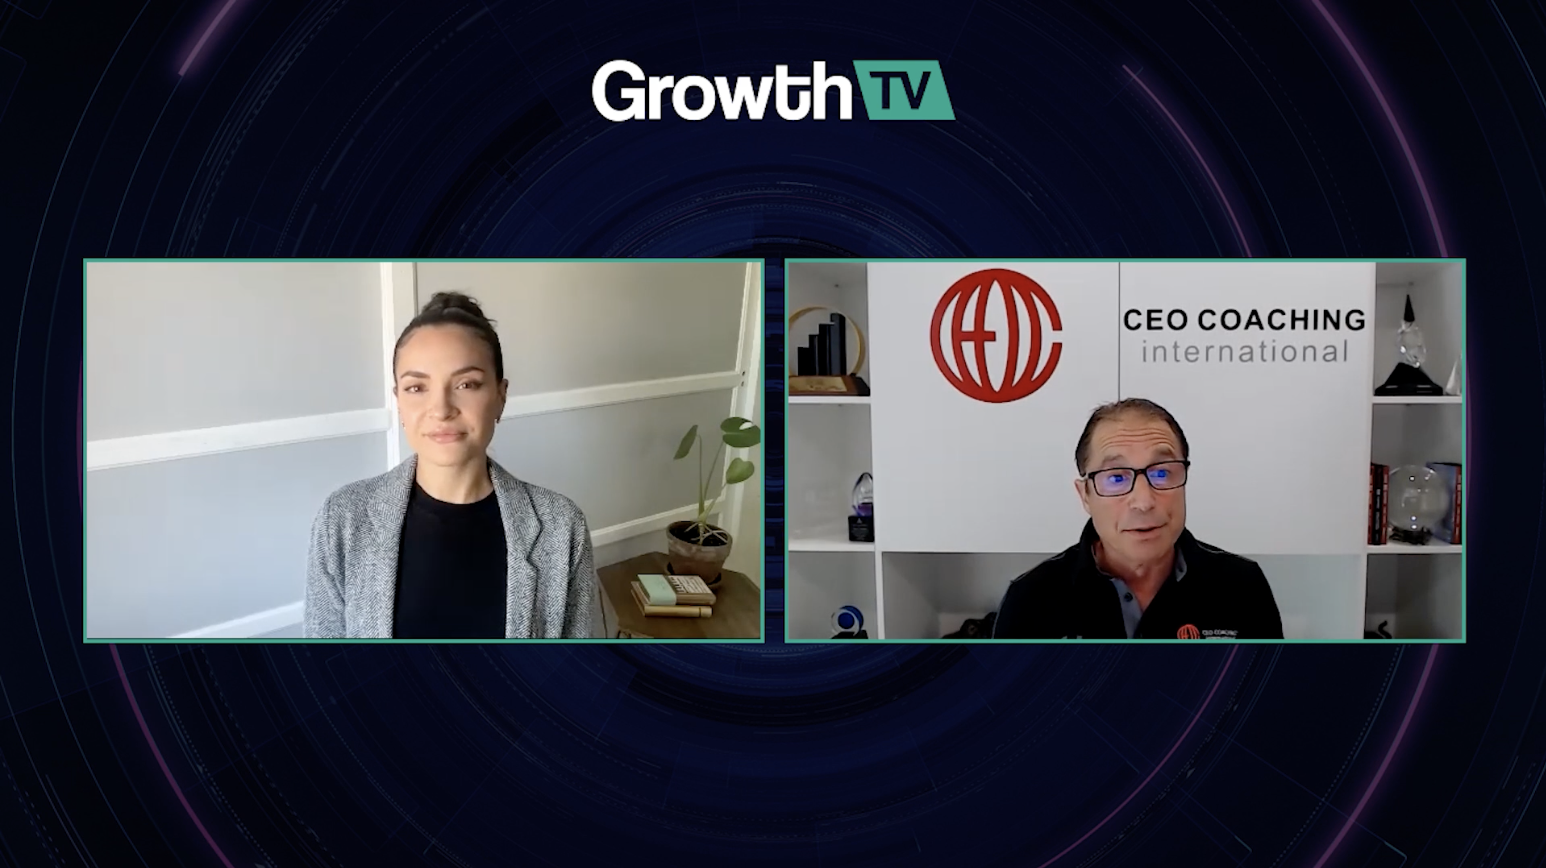 growthtv-ceo-coaching-disconnect-pe-partners-company-leaders